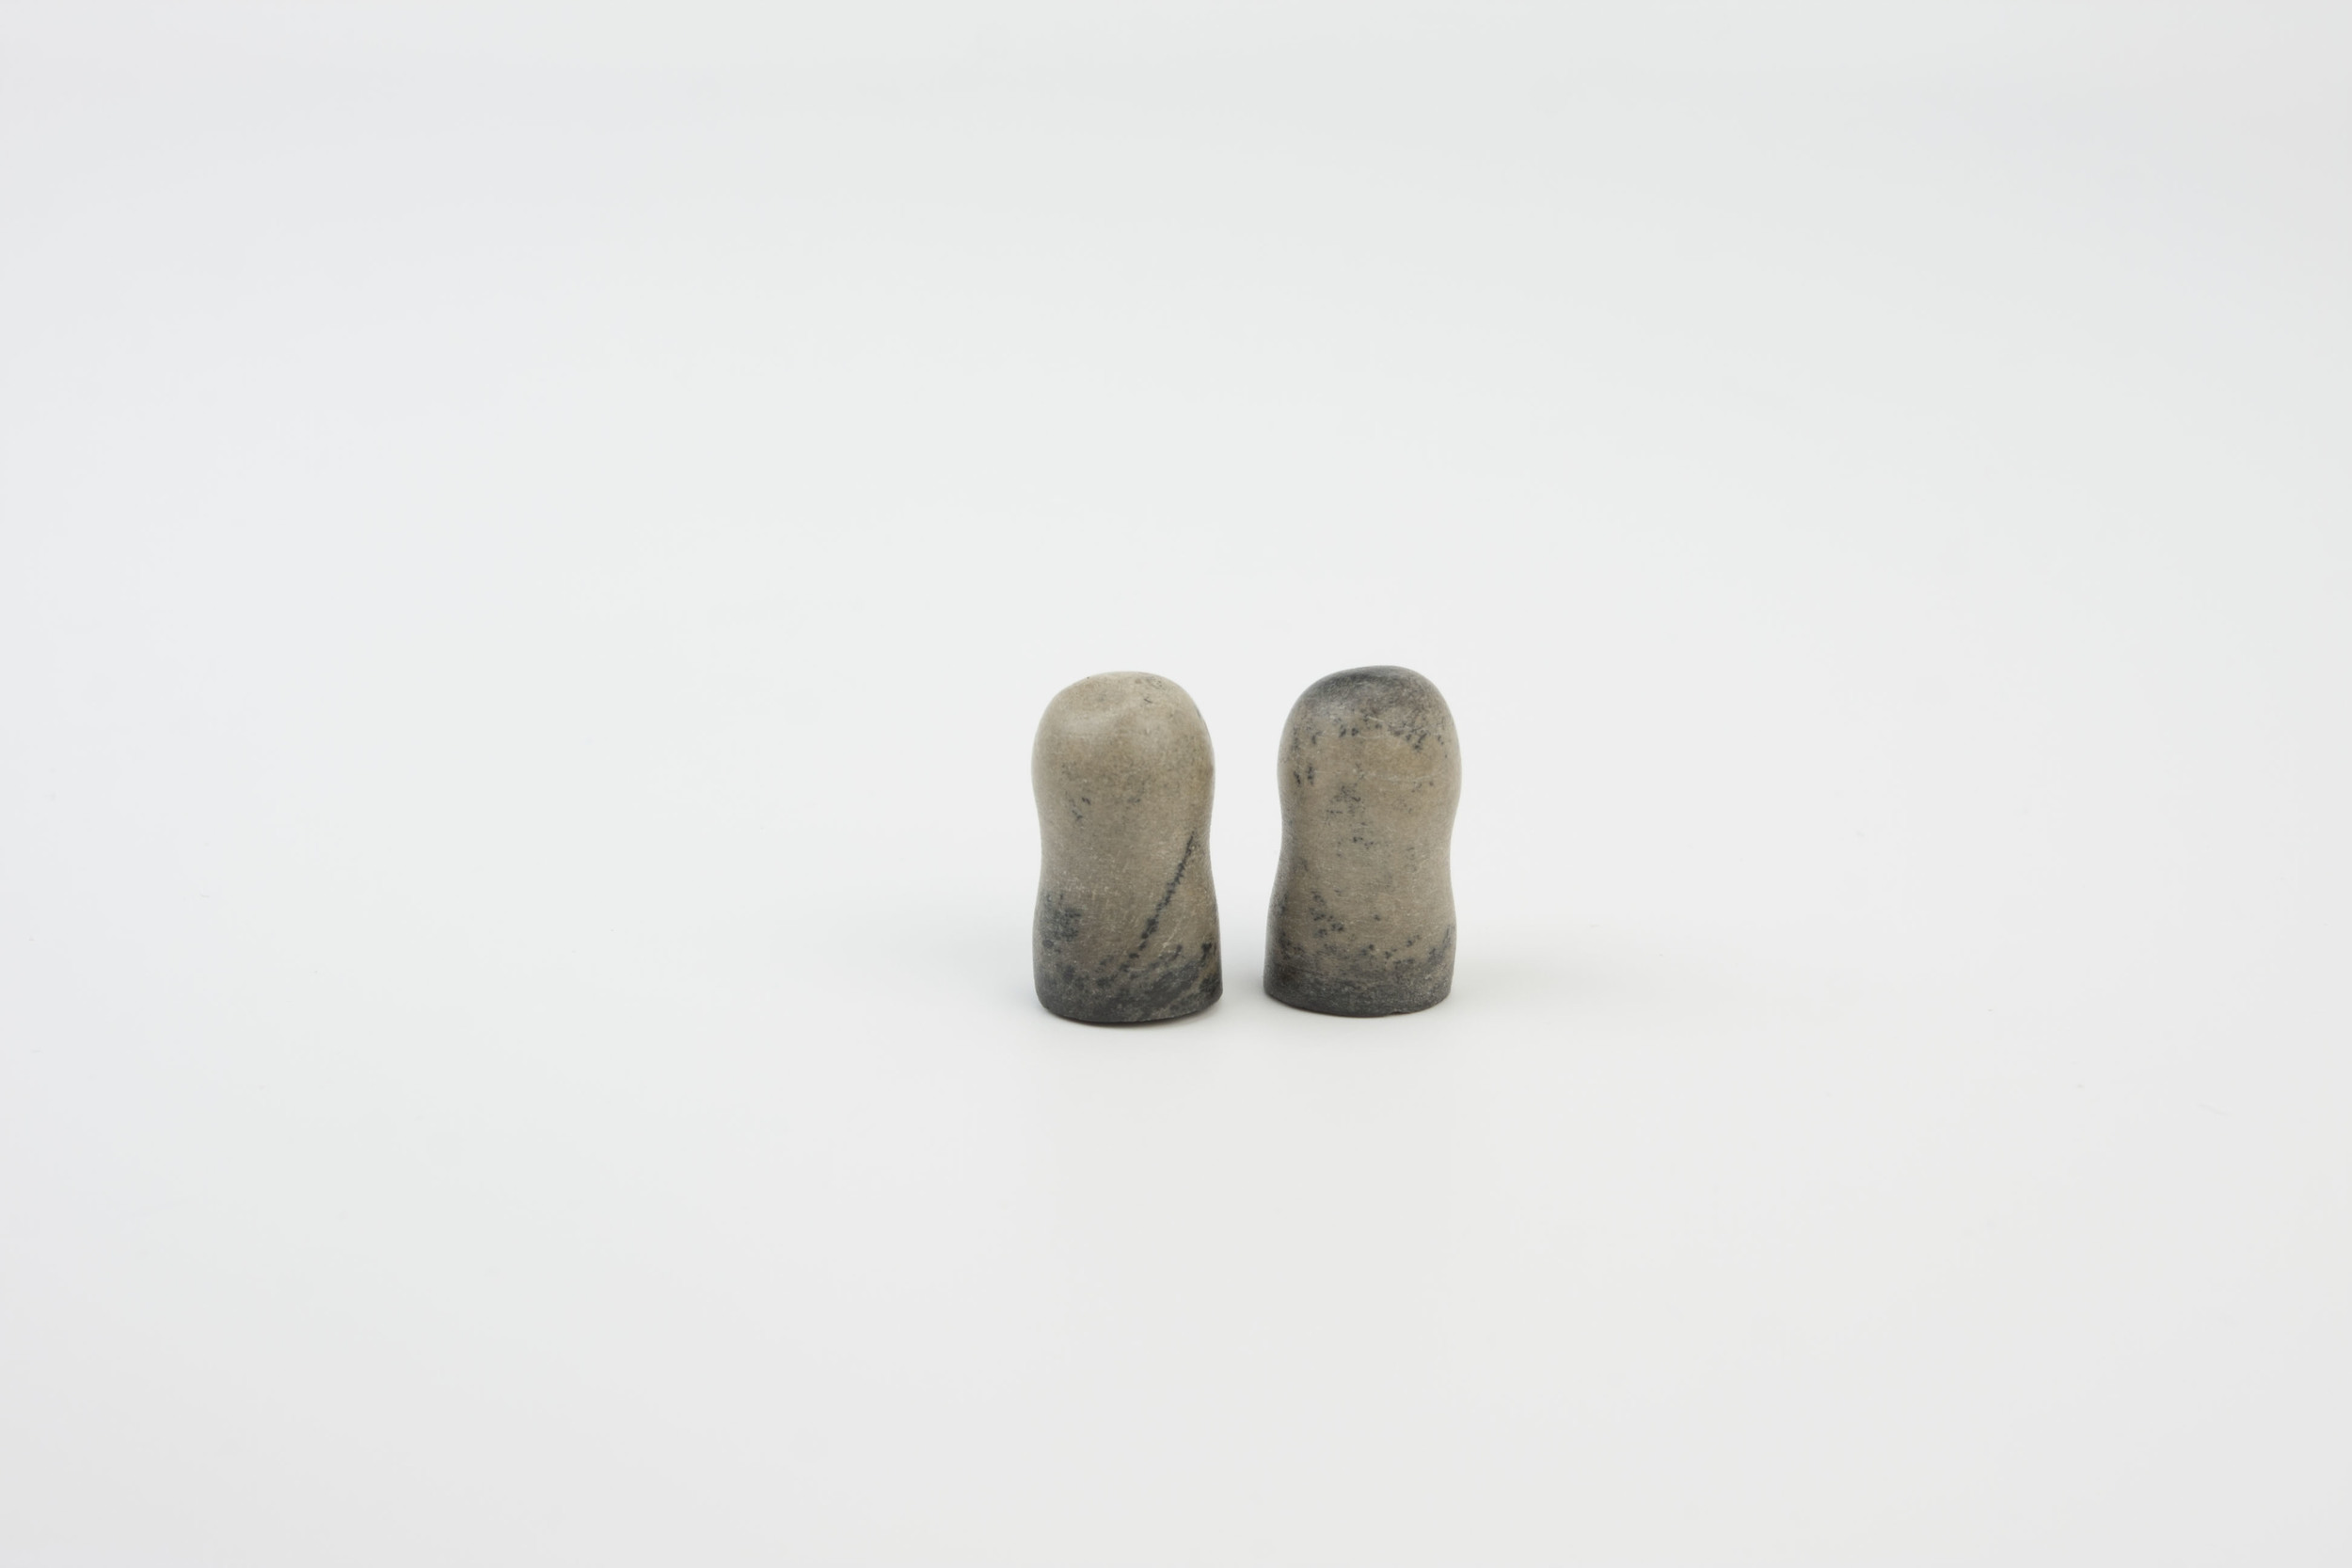 Earplugs - carved from the fossilized inner ear bone of a whale